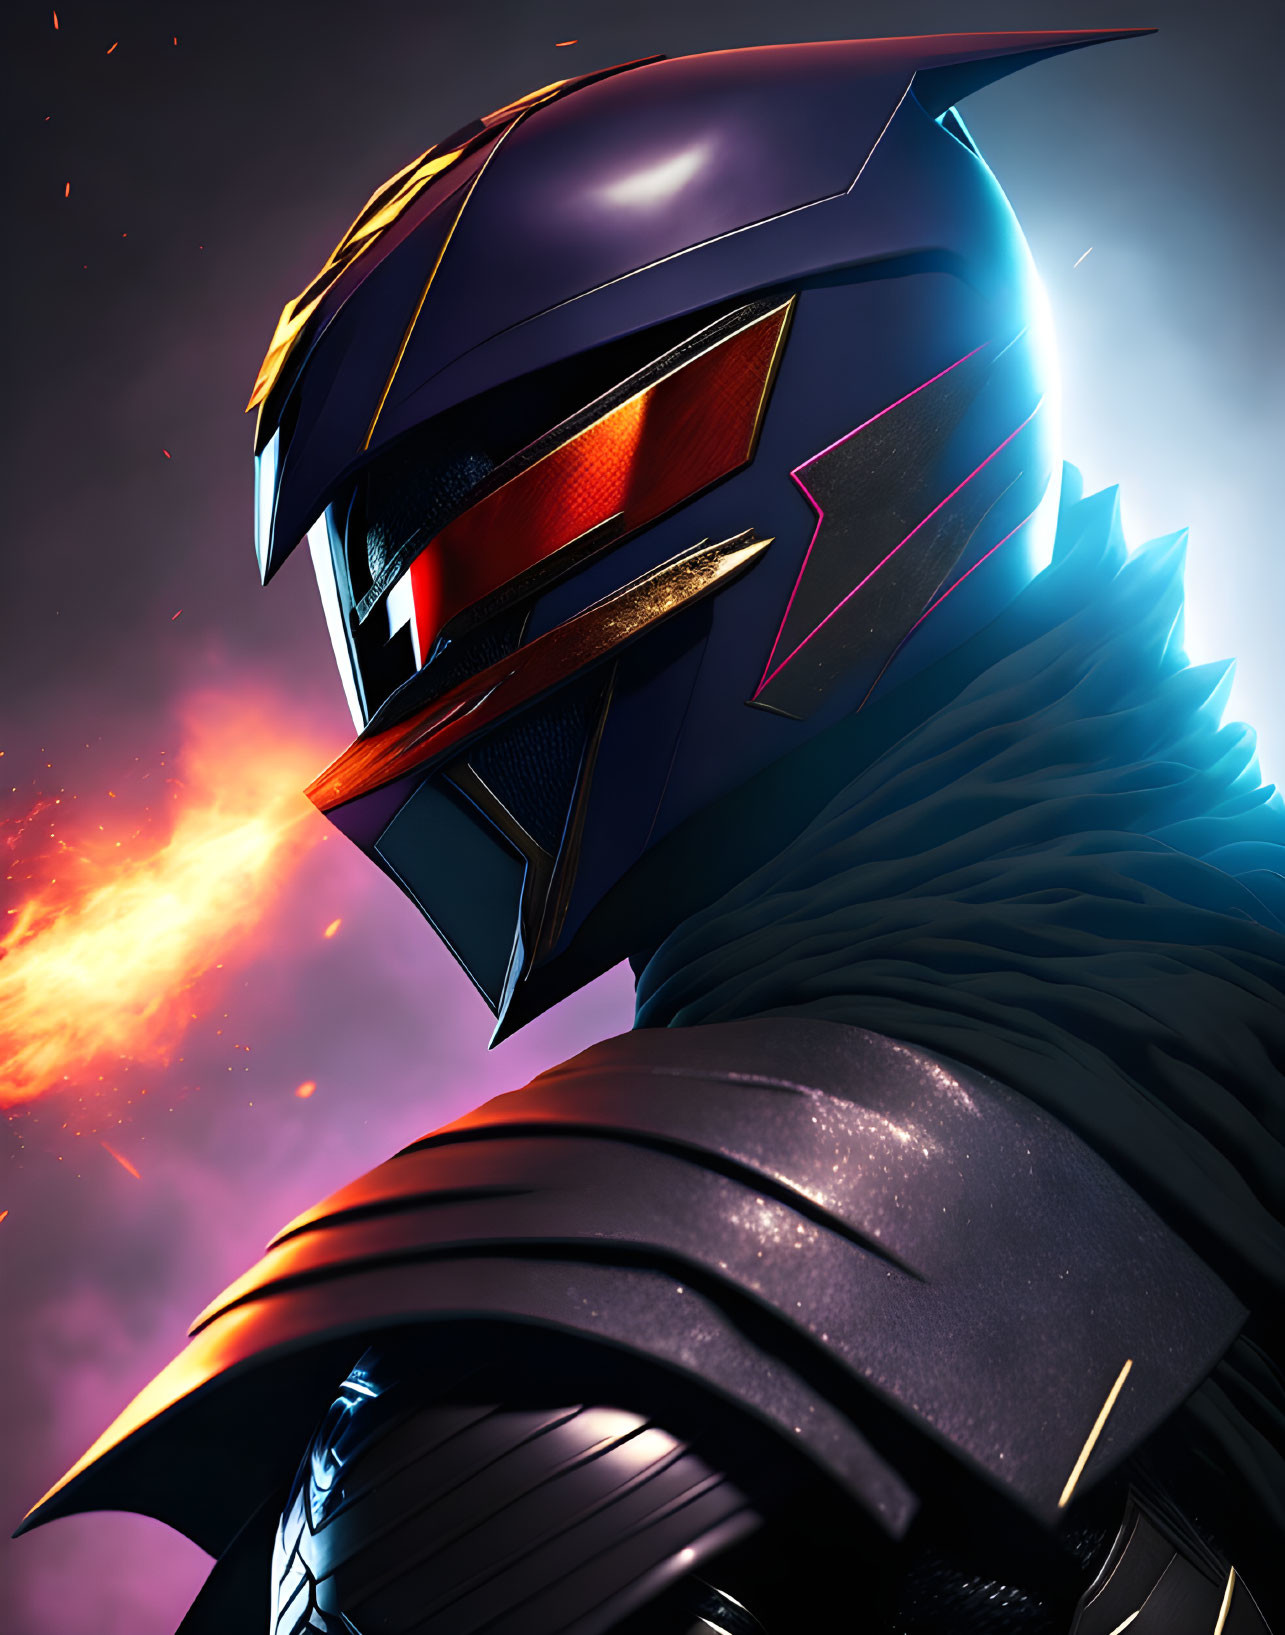 Detailed Close-Up of Animated Robot with Blue and Purple Helmet and Red Glowing Eyes